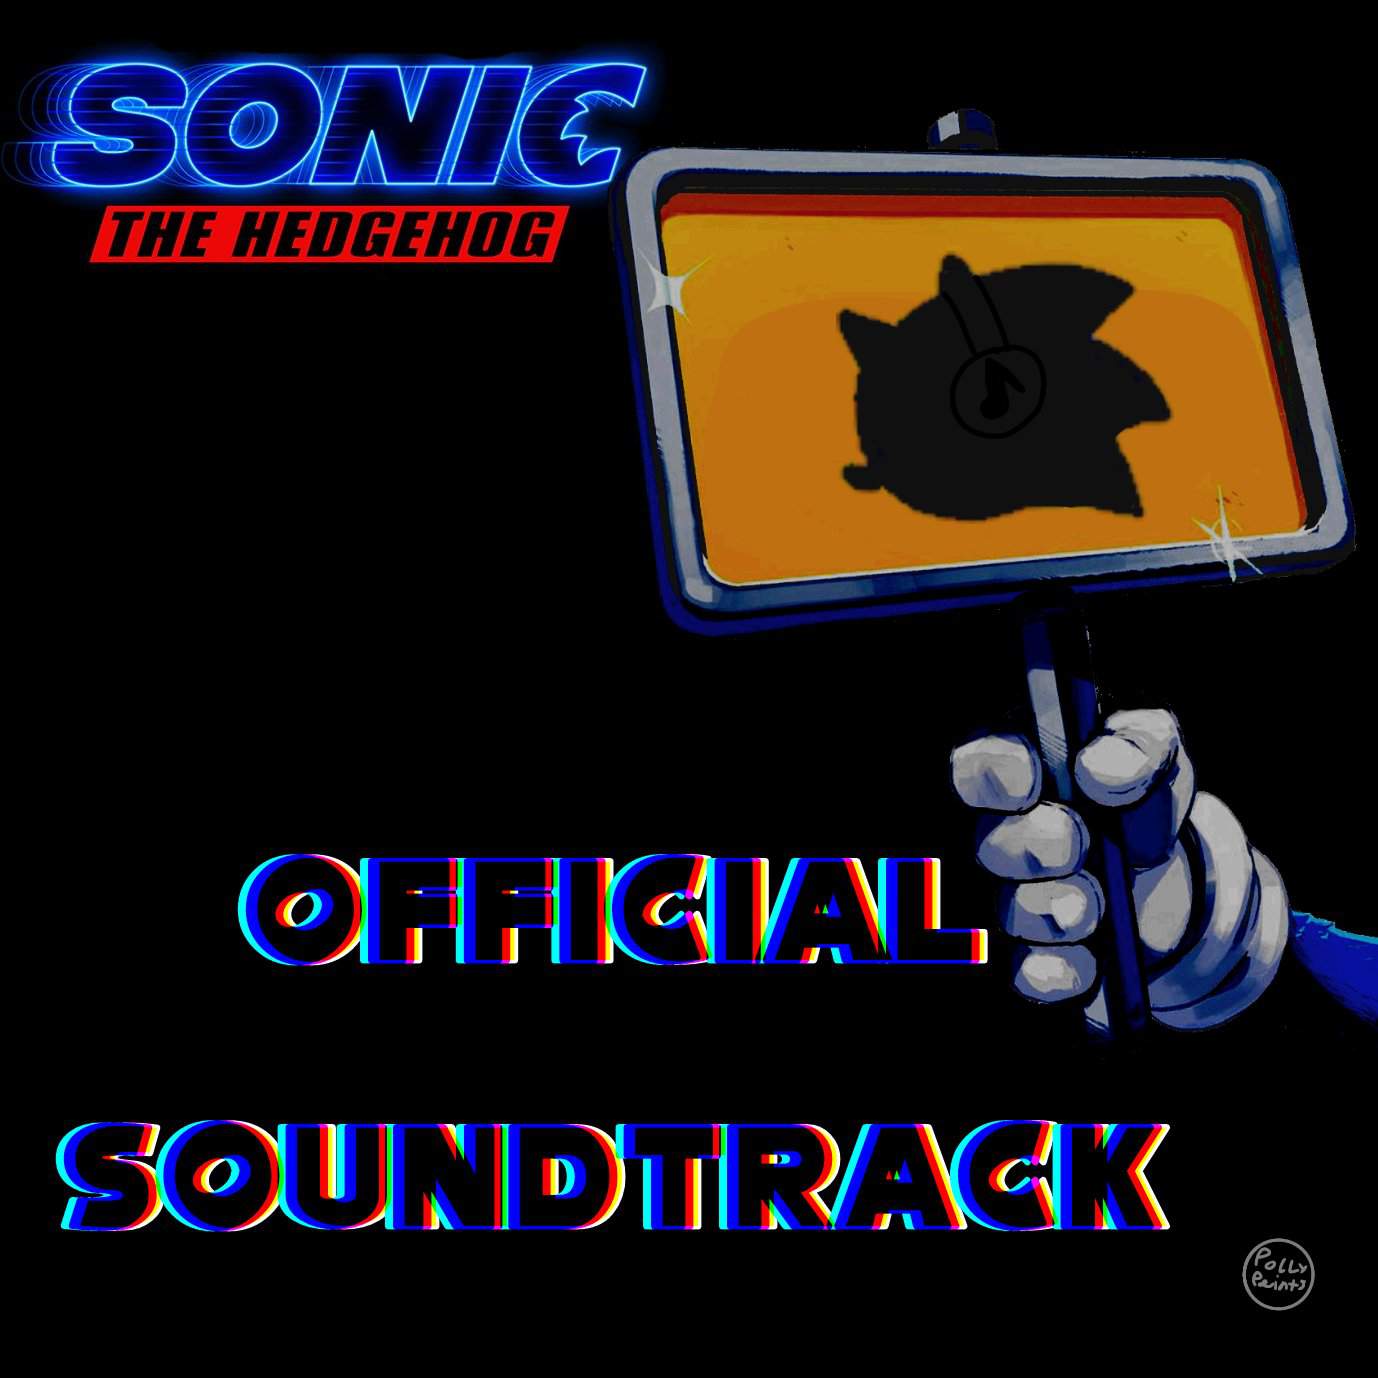 sonic cd soundtrack extended